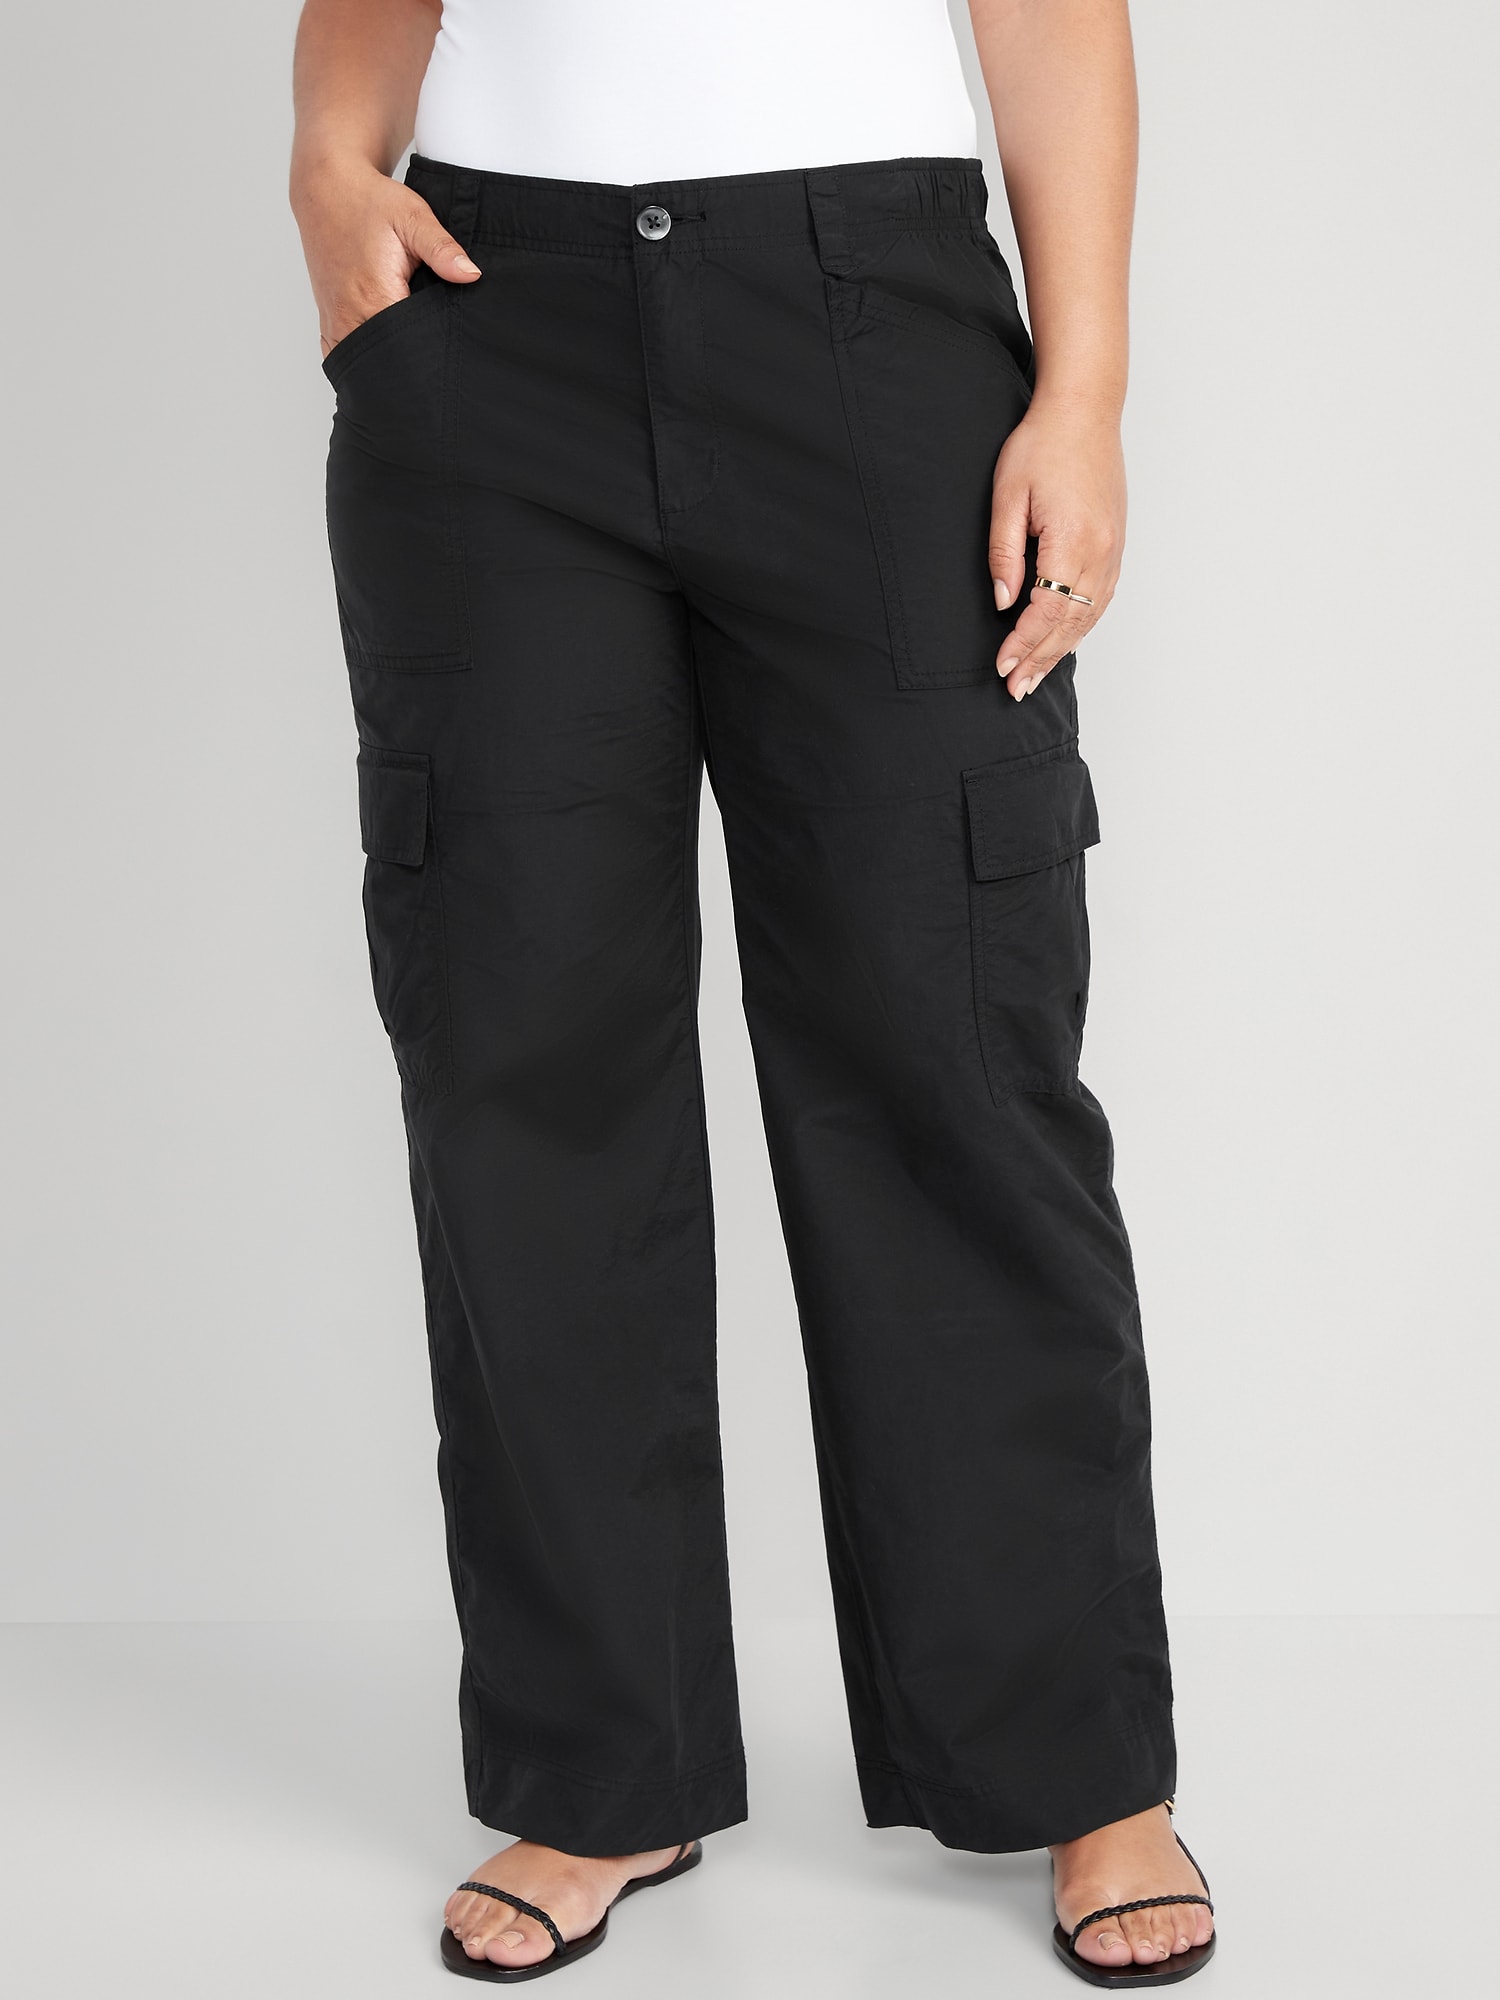 Buy ONLY Solid Regular Fit Cotton Women's Casual Wear Cargo Pant | Shoppers  Stop